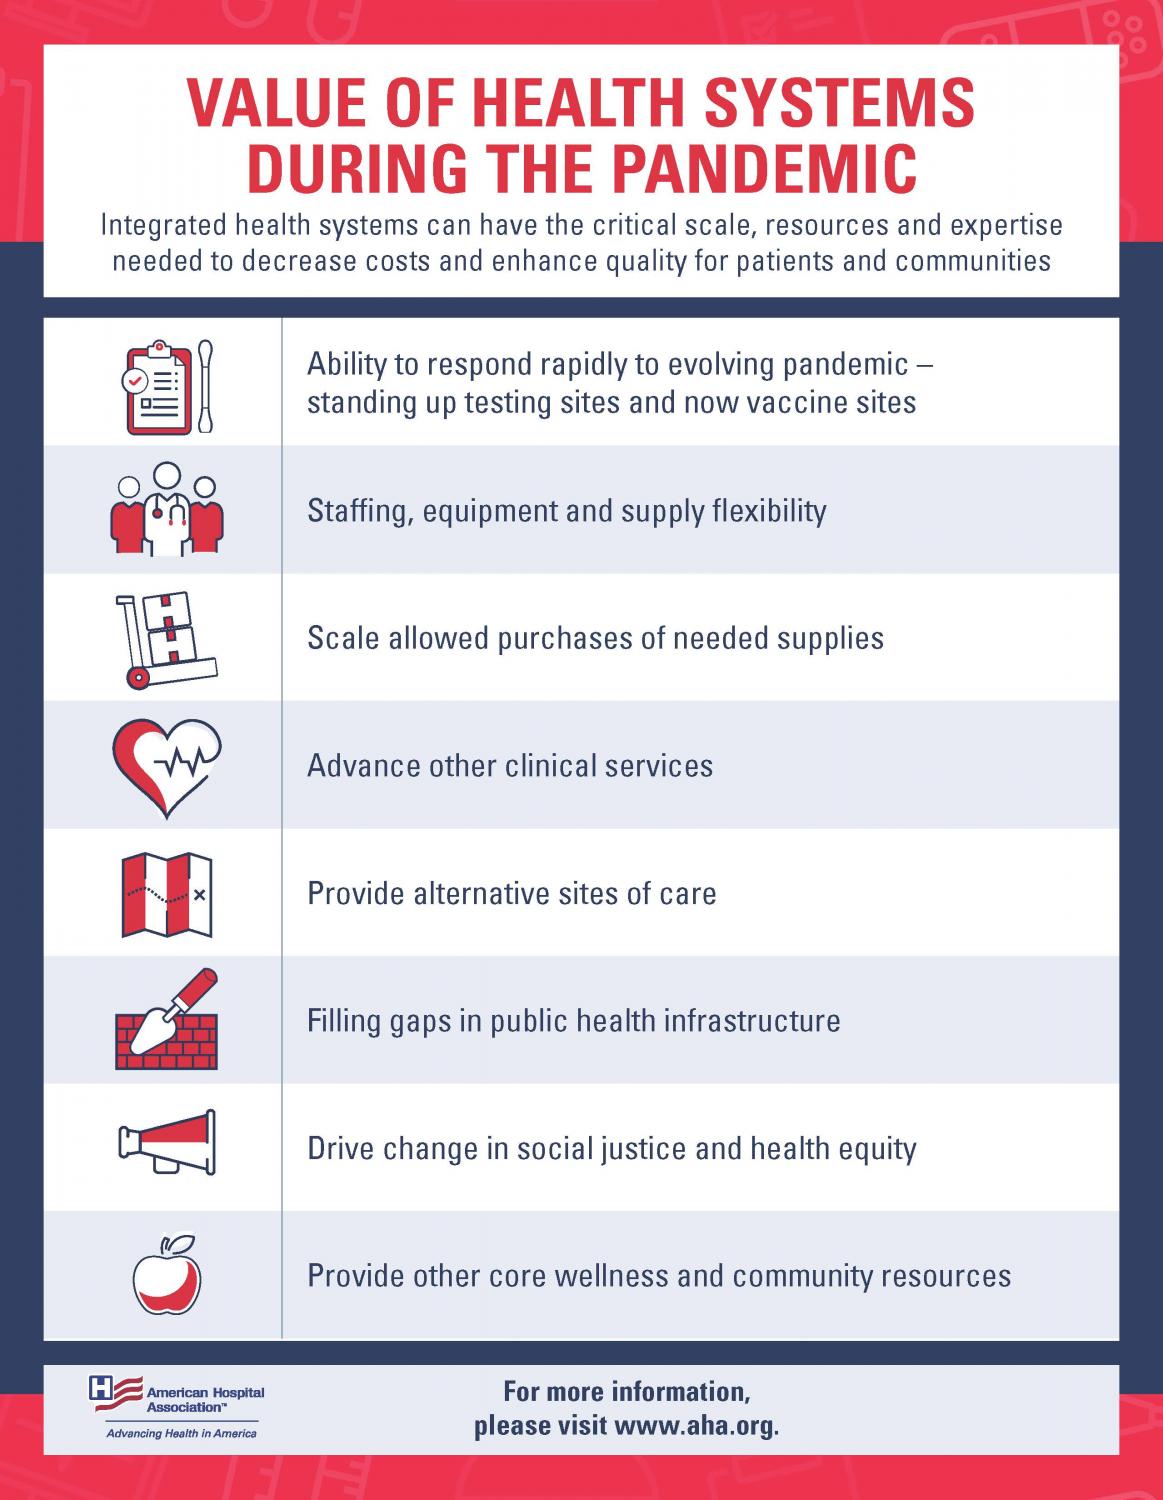 Value of Health Systems during the Pandemic infographic. Integrated health systems have the critical scale, resources and expertise needed to decrease costs and enhance quality for patients and communities.